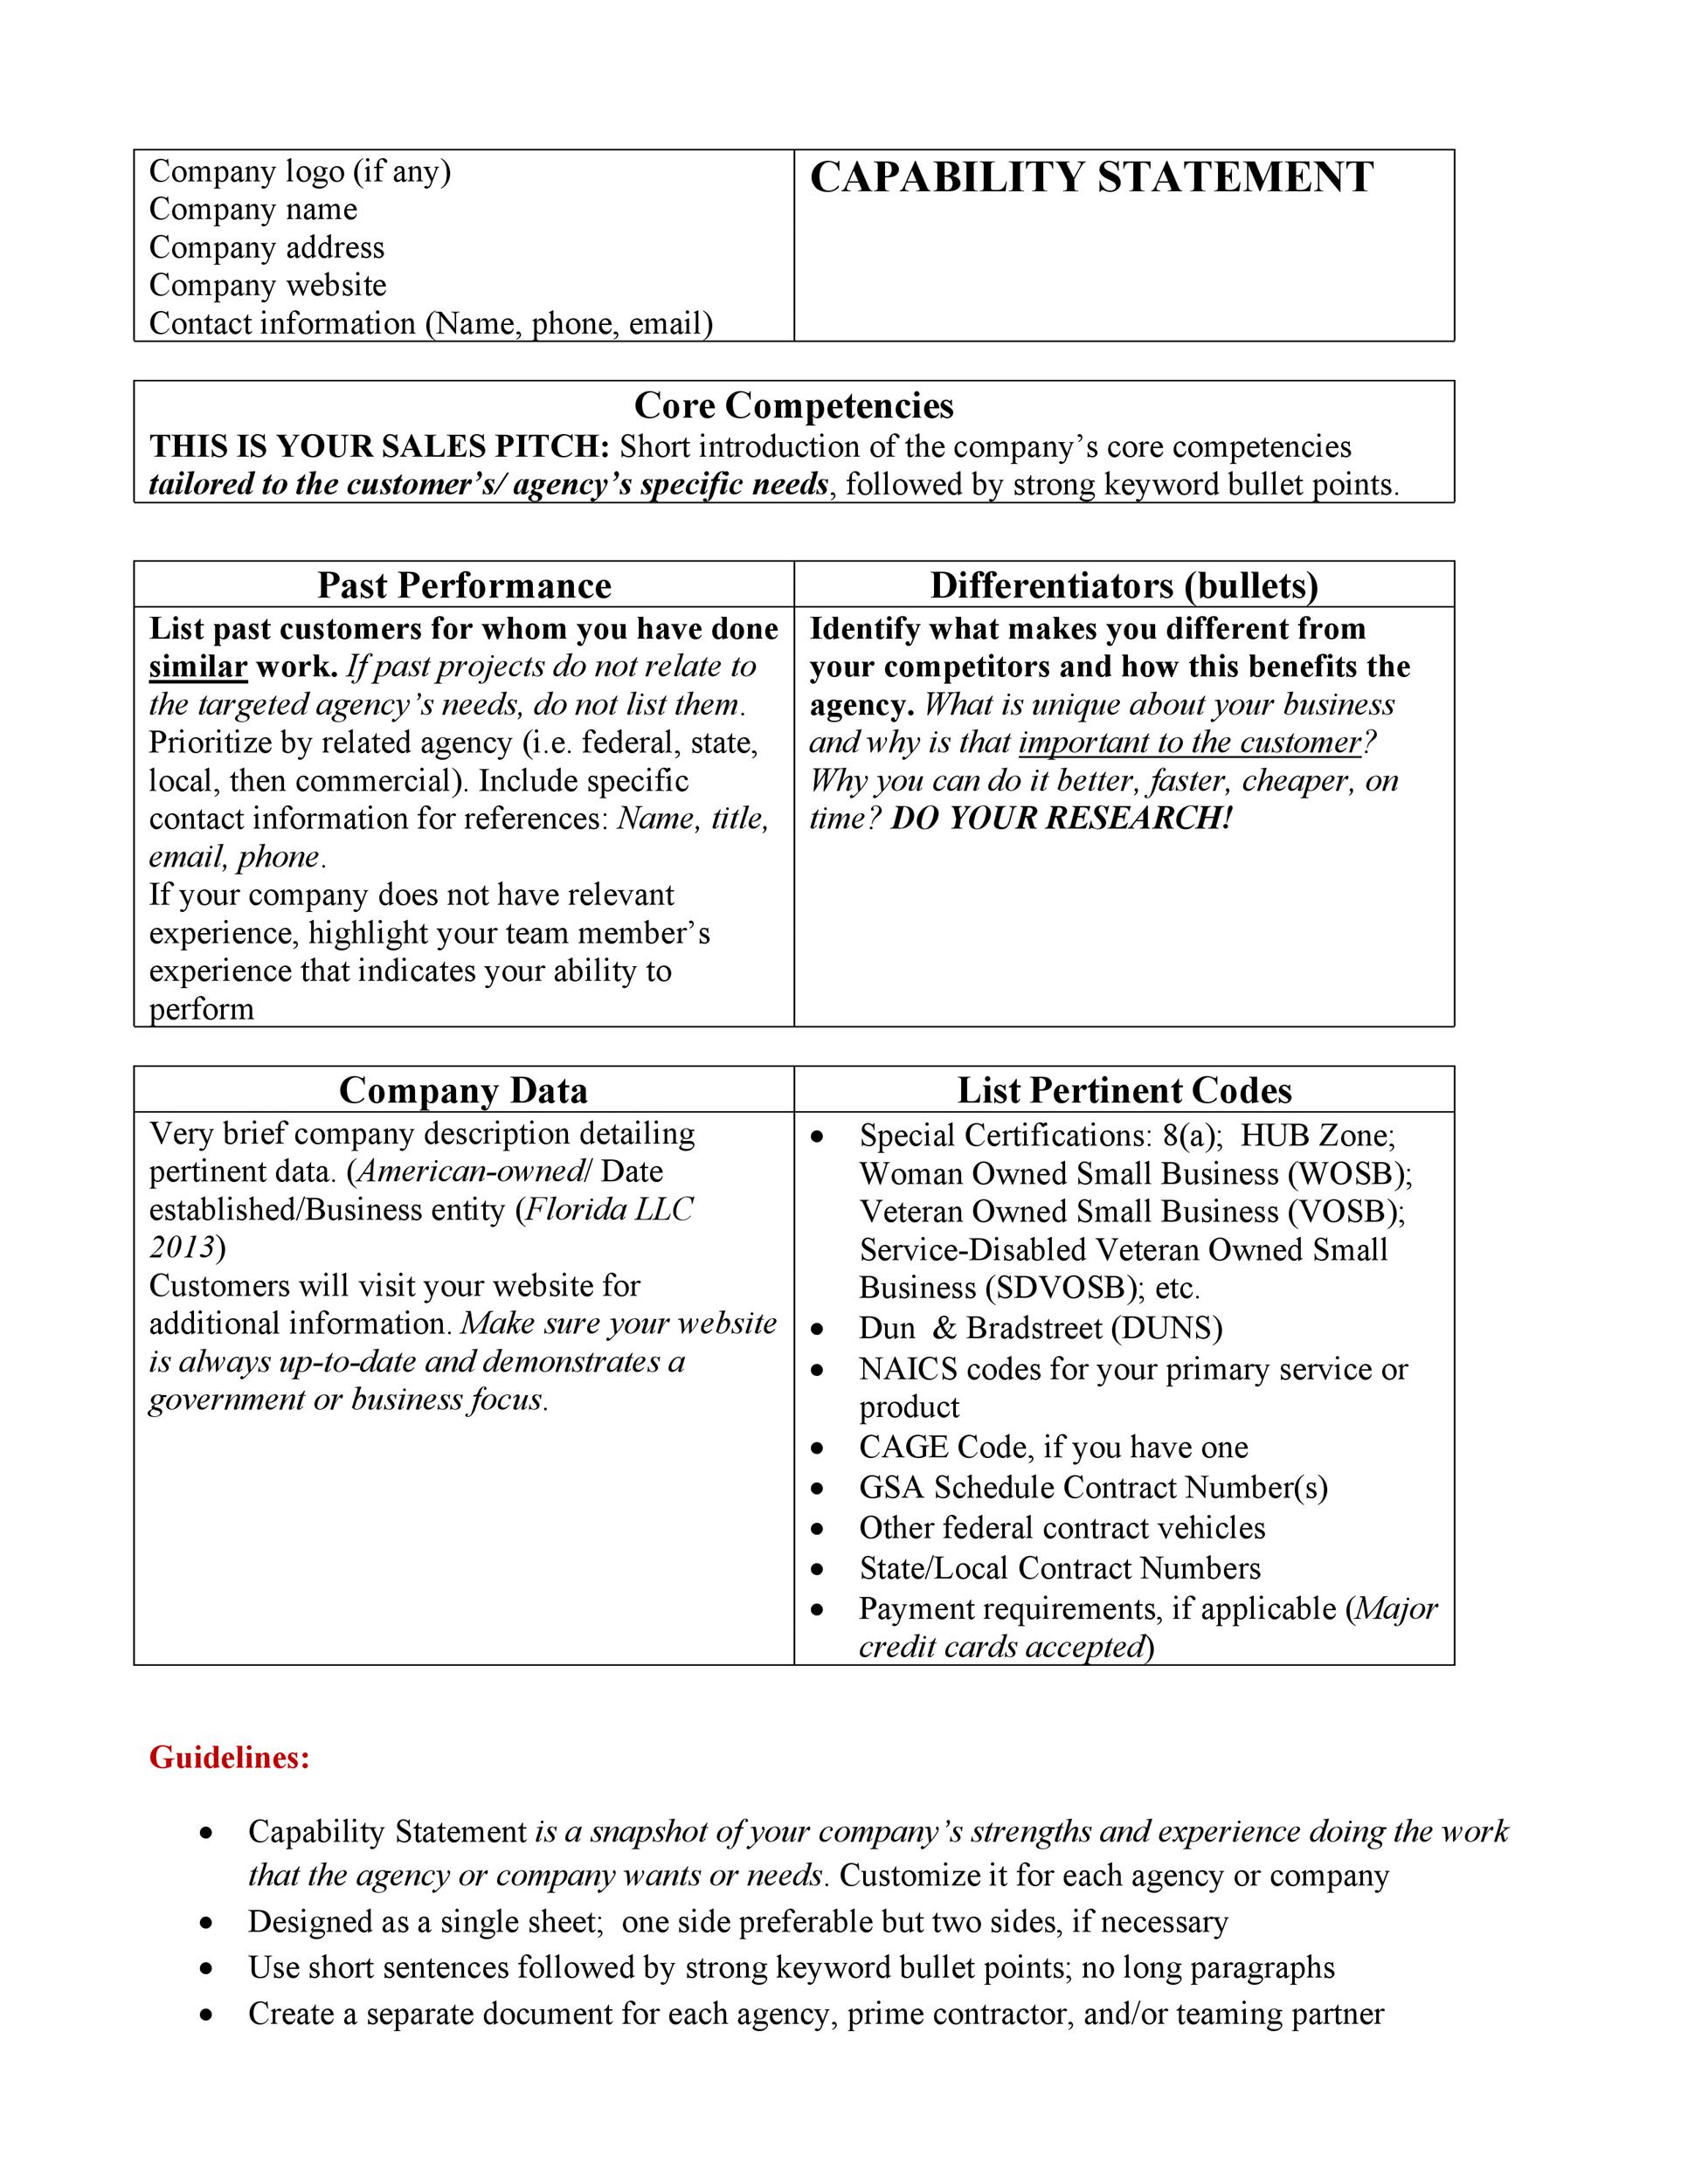 How To Write A Capability Statement Template